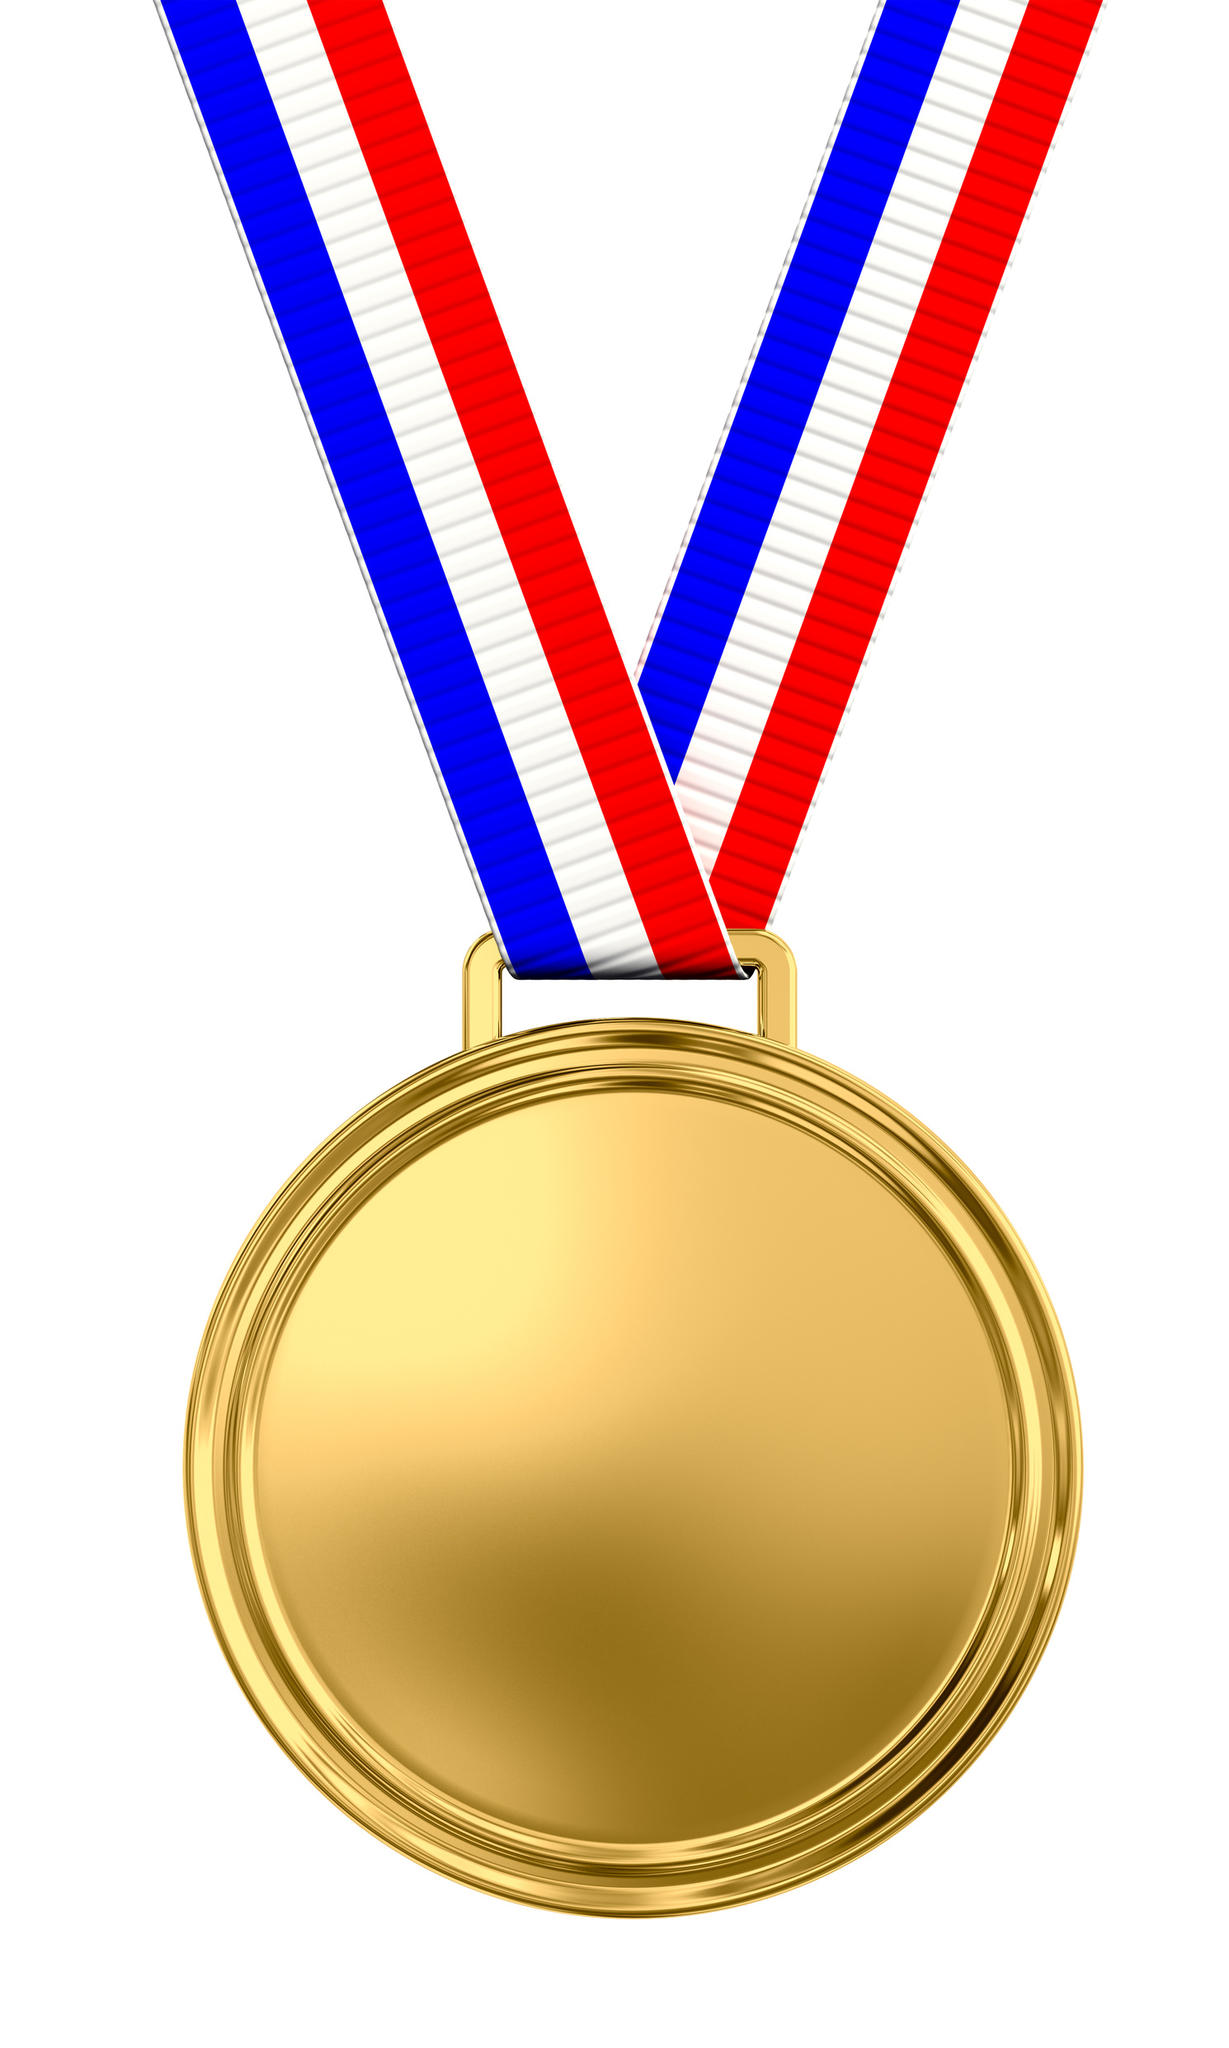 Blank Gold Medal With Tricolor Ribbon   3d Render